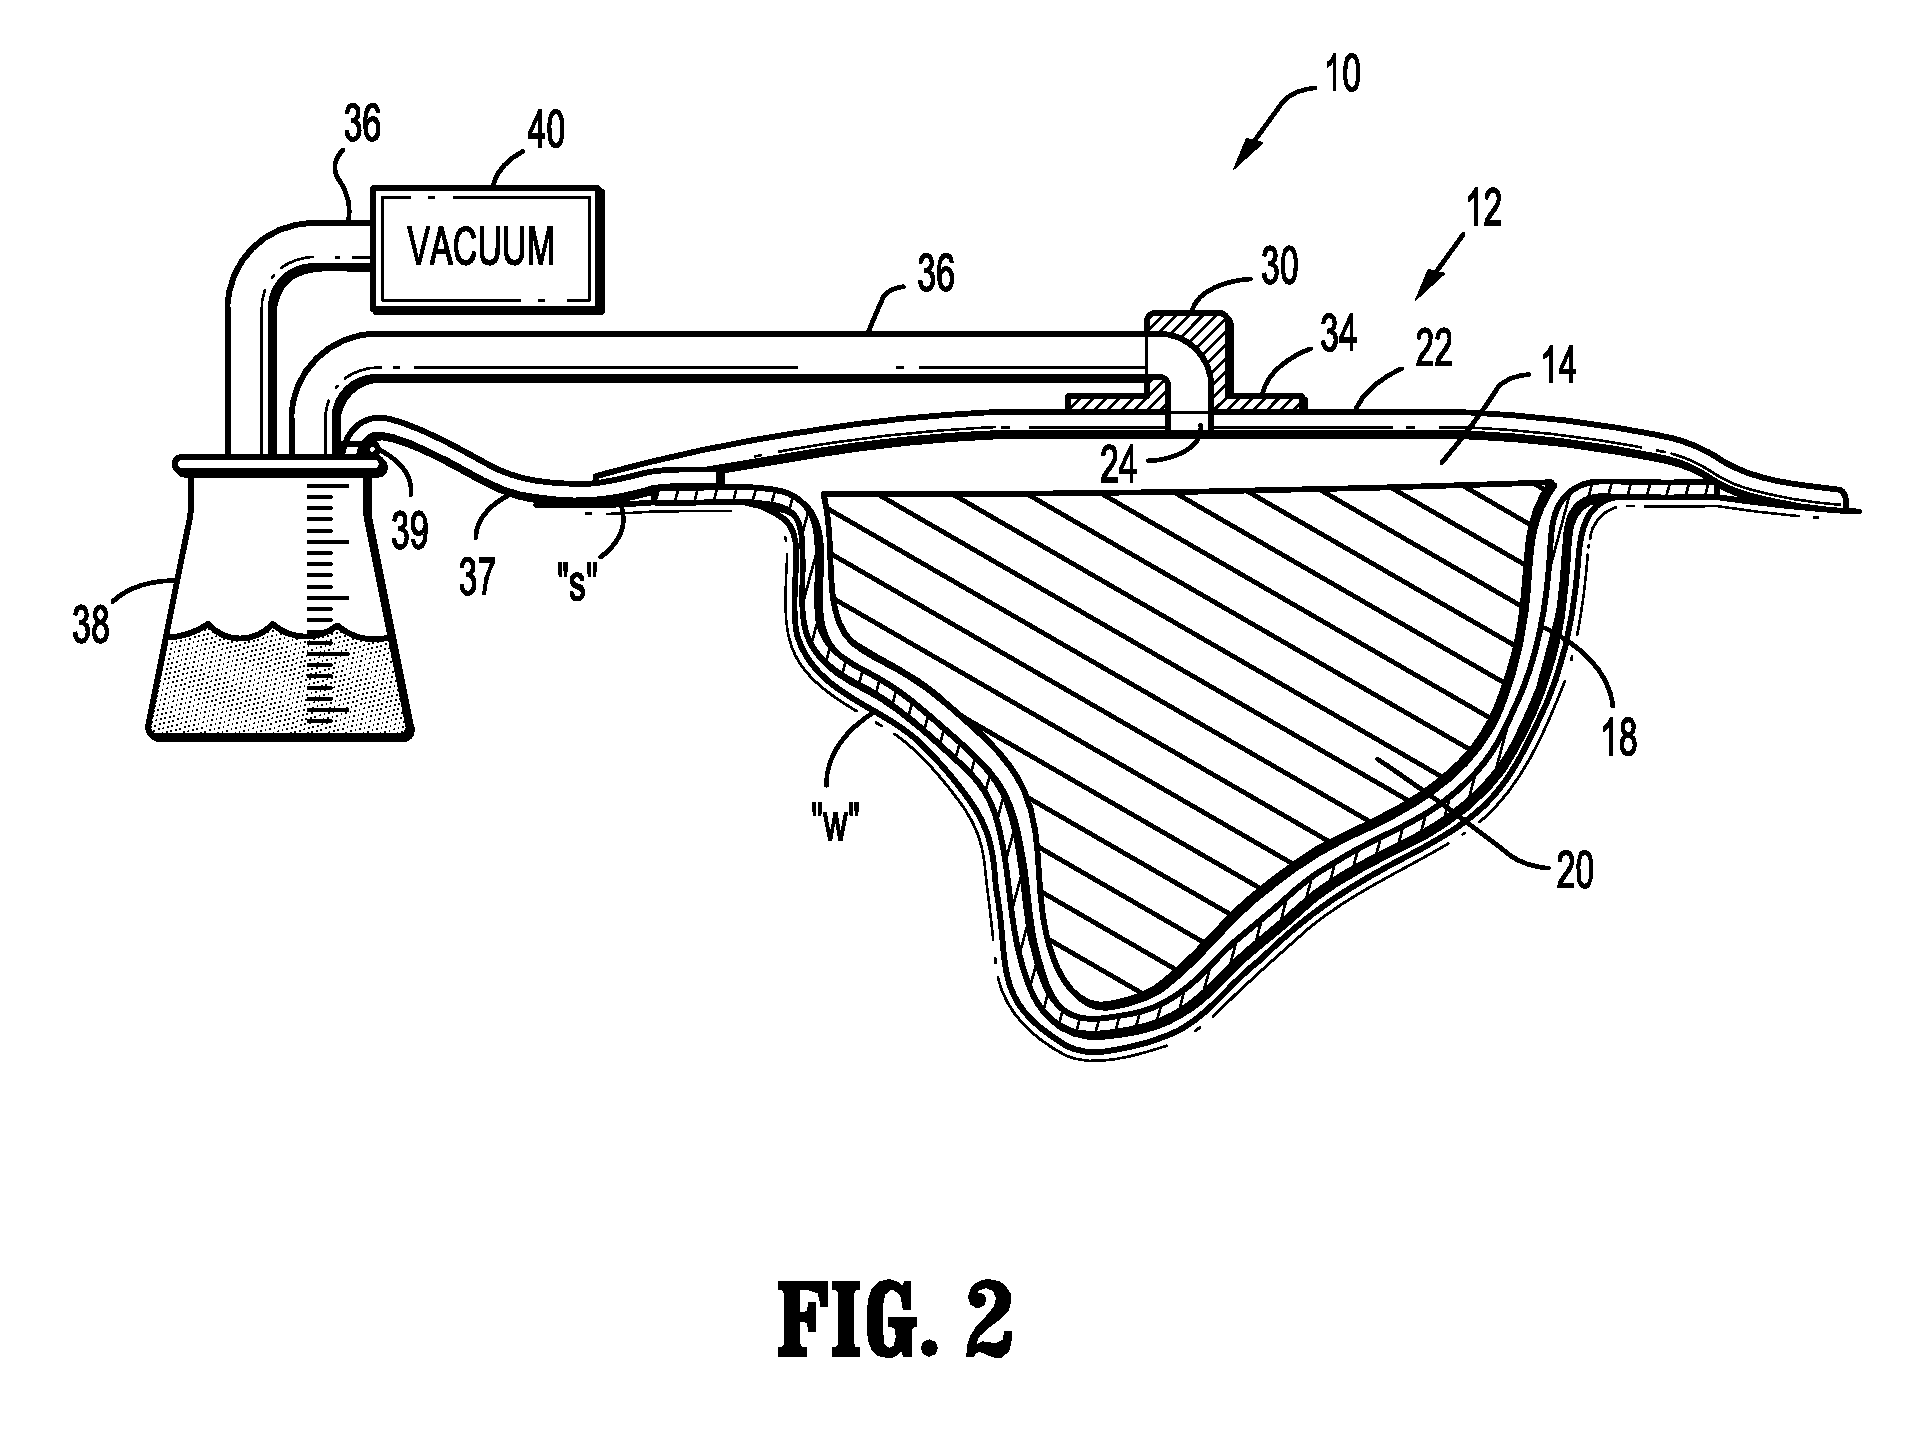 System for Providing Continual Drainage in Negative Pressure Wound Therapy